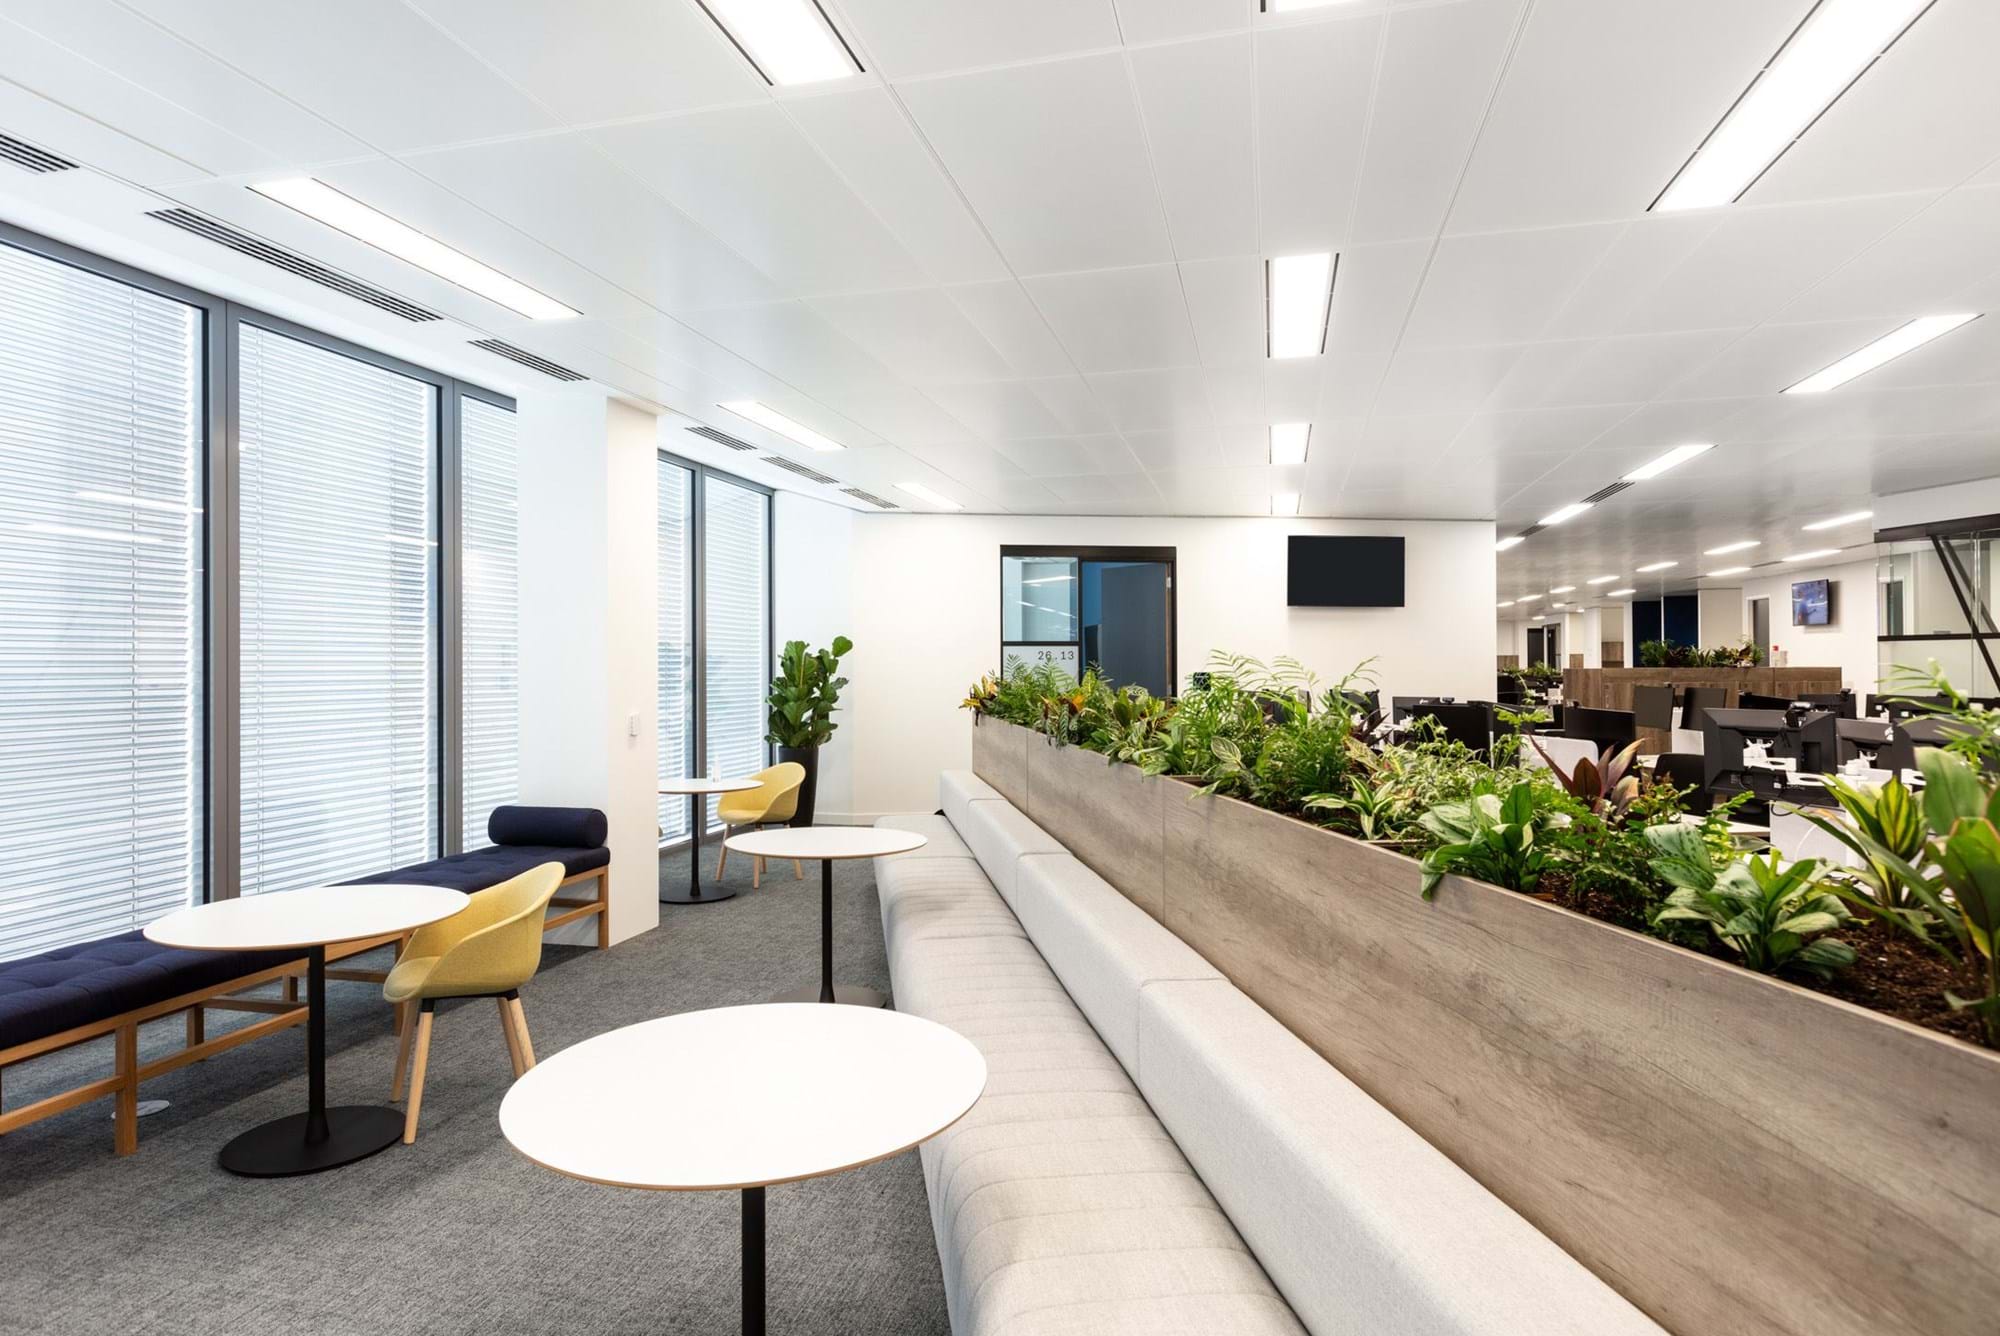 Modus Workspace office design, fit out and refurbishment - Insurance and Risk Management Firm - Modus_Verisk_Day2-46.jpg